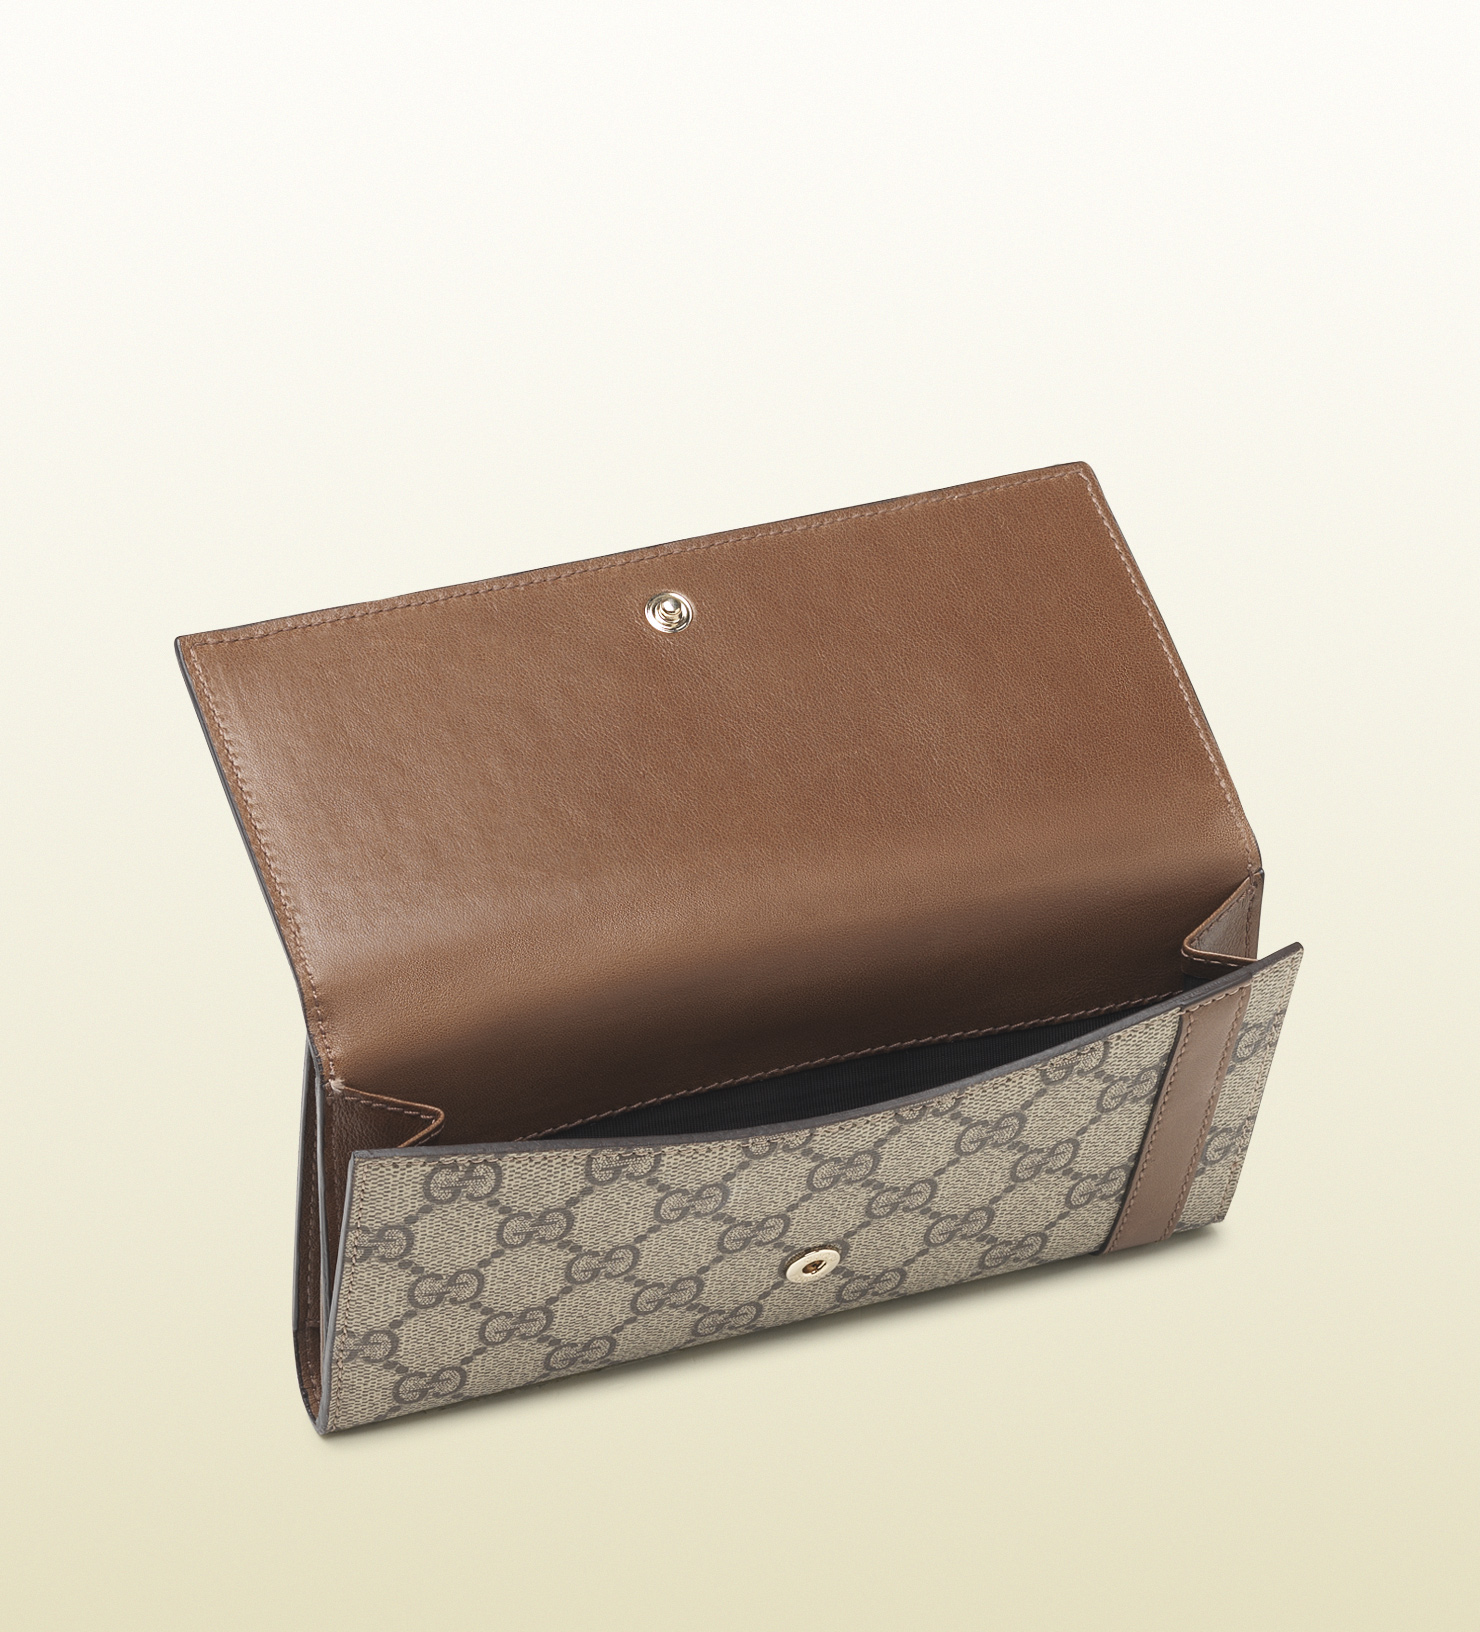 Gucci Nice Gg Supreme Canvas Continental Wallet in Natural - Lyst